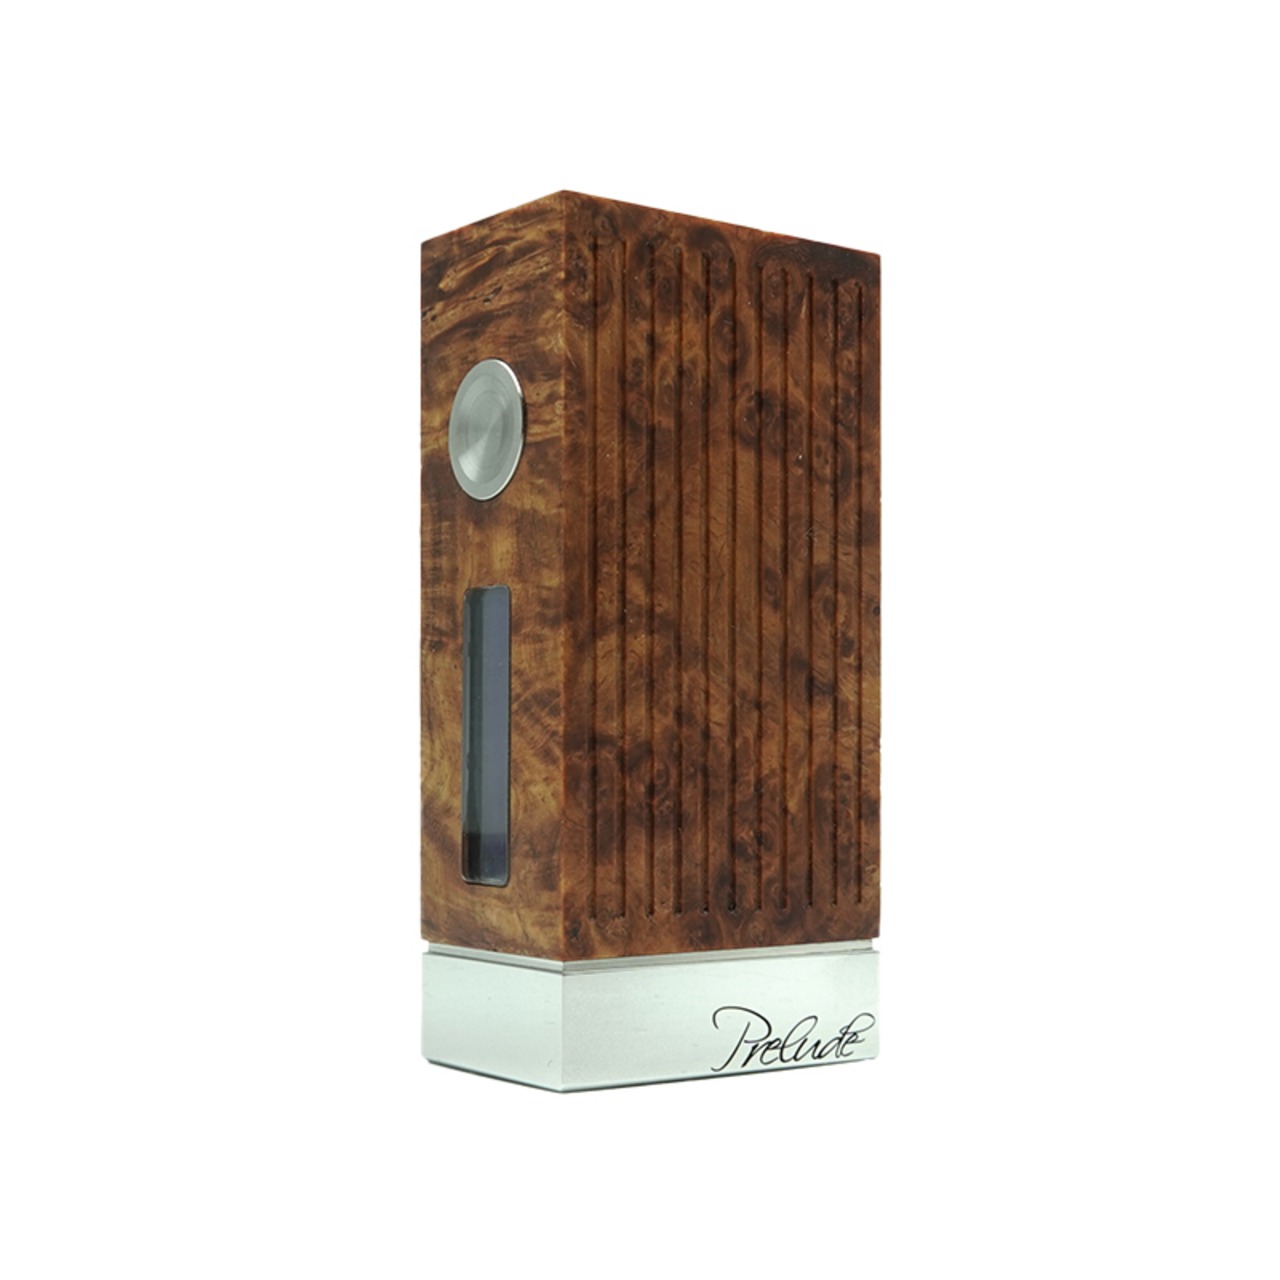 Prelude Micro LE stab wood by XTRA MILE VAPE